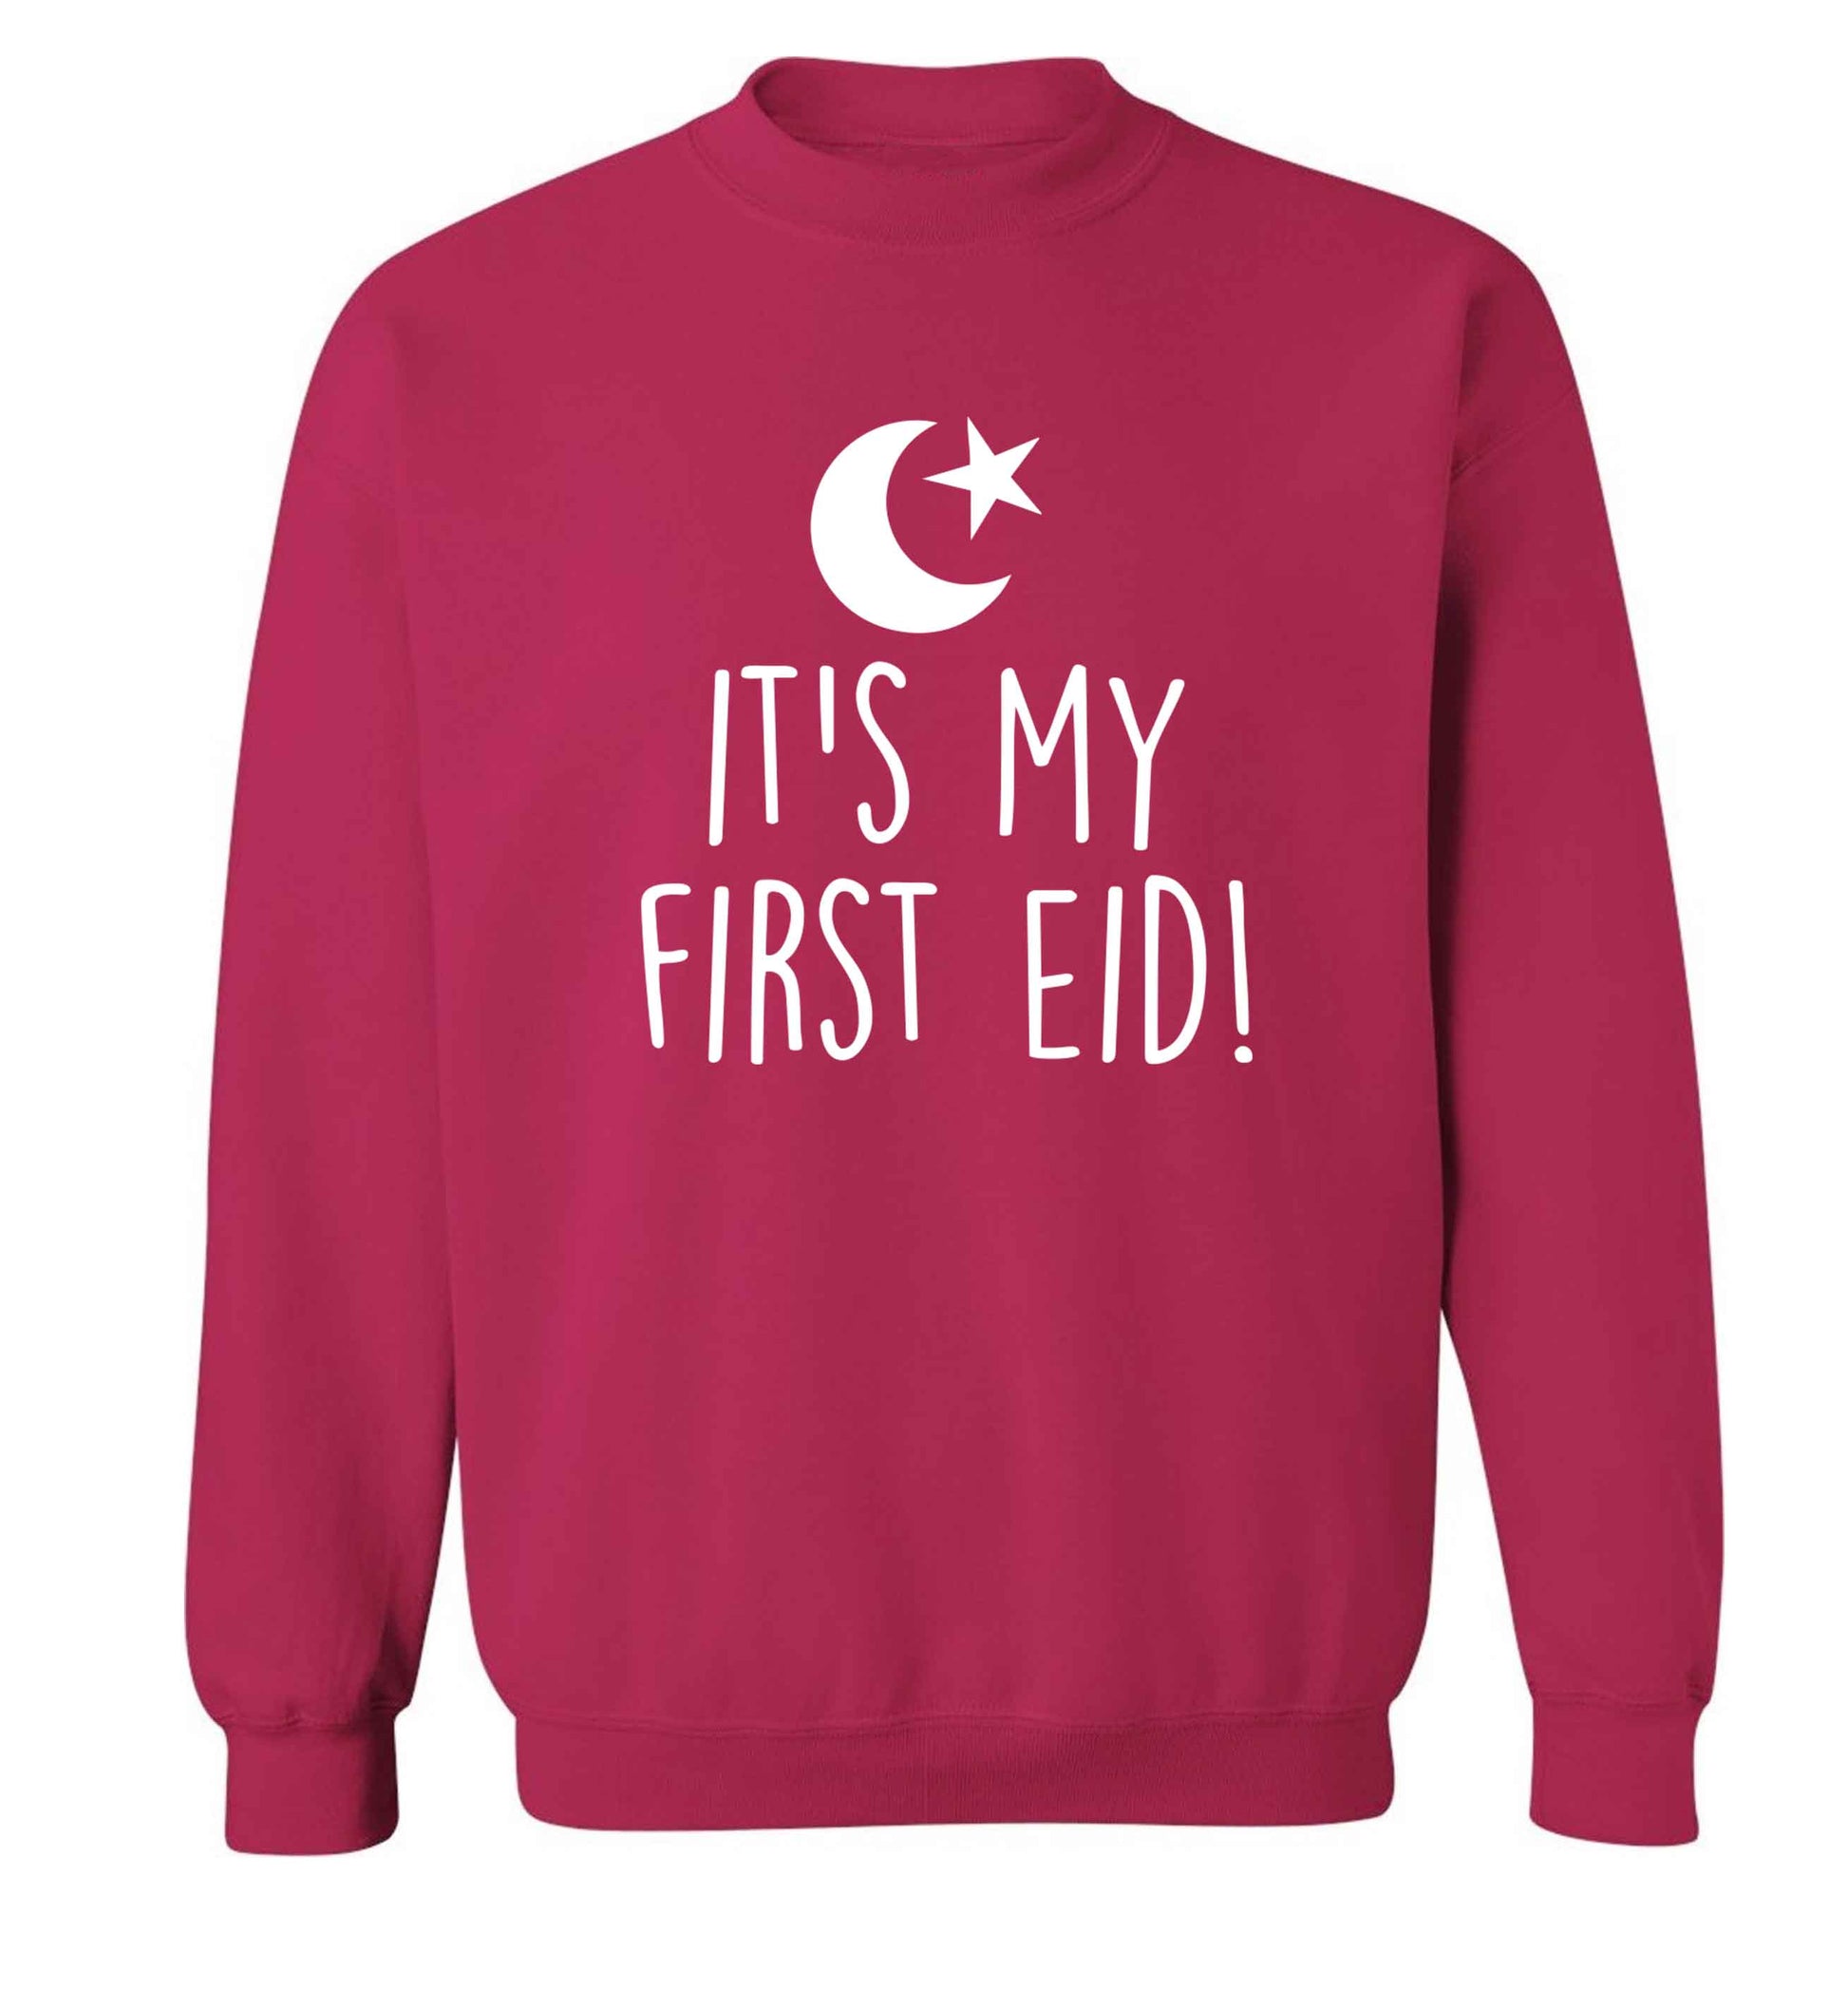 It's my first Eid adult's unisex pink sweater 2XL